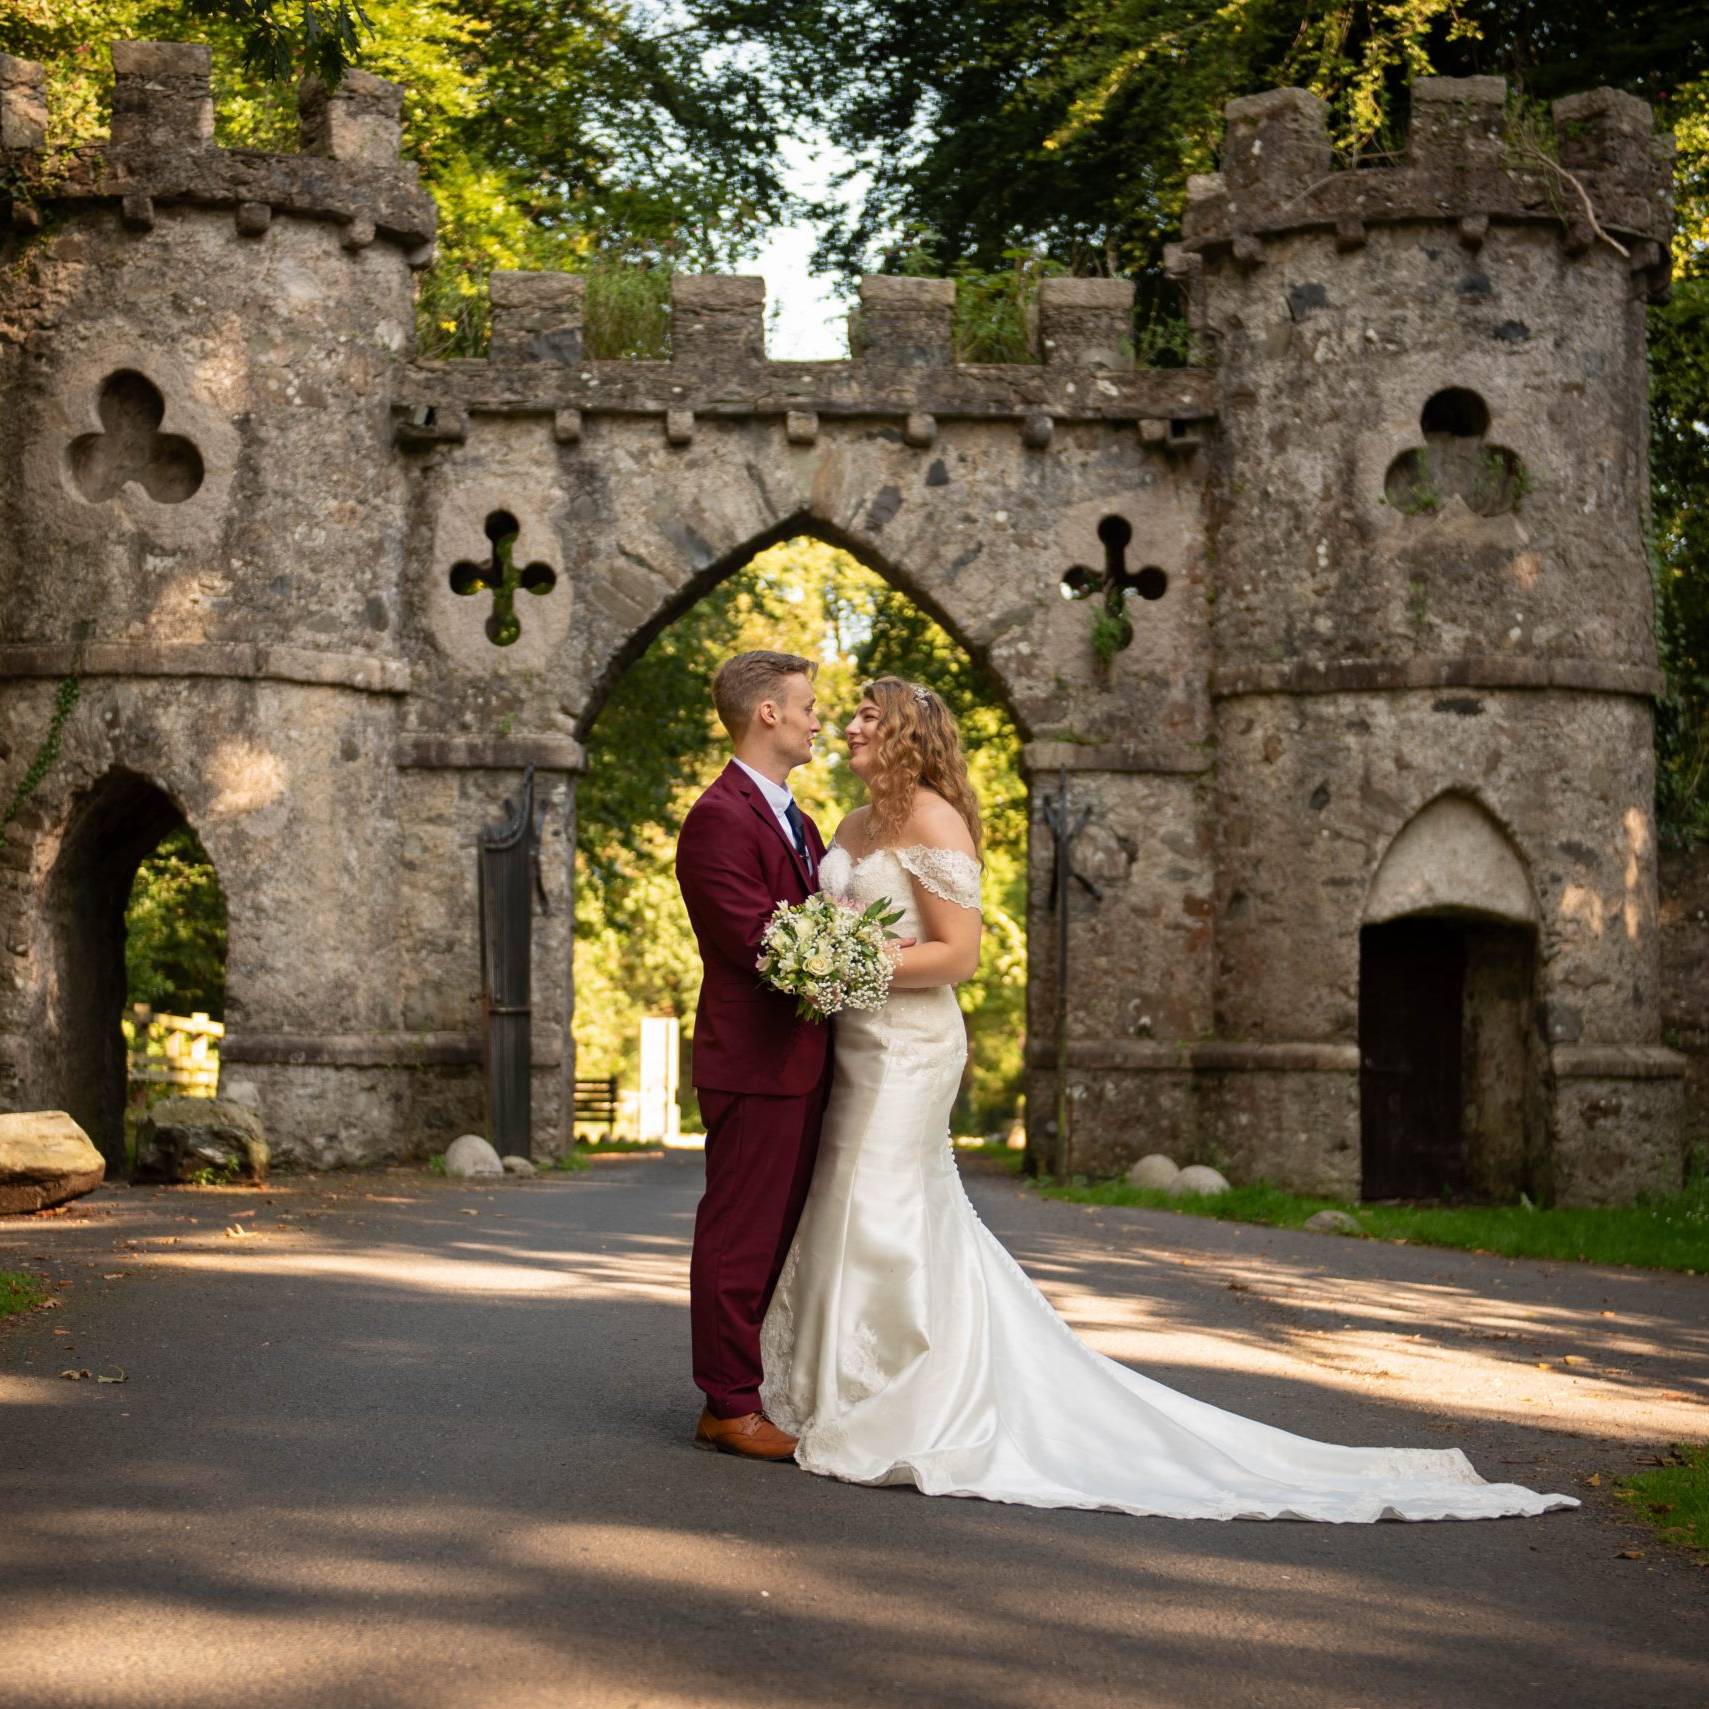 Bride & Groom embrace on the driveaway up to the beautiful archway at Tollymore Forest Park